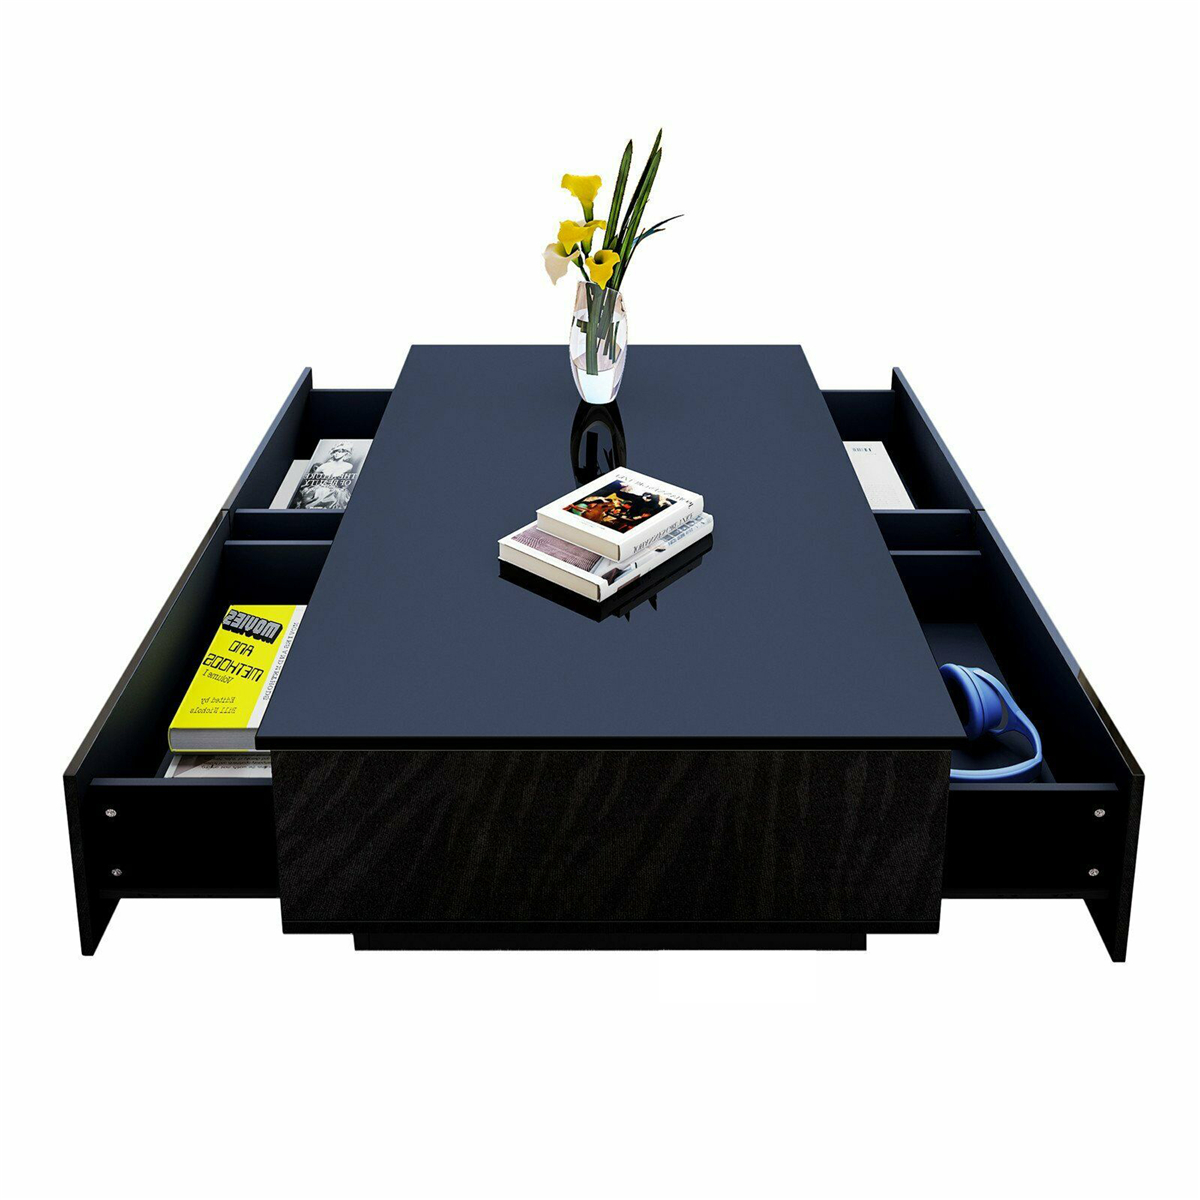 Hommpa Rectangular LED Coffee Table with 4 Drawers High Gloss Black Finish Modern Living Room Furniture Sofa Side Cocktail Table 37.4 x 23.6 x 15.4 inches - image 1 of 11